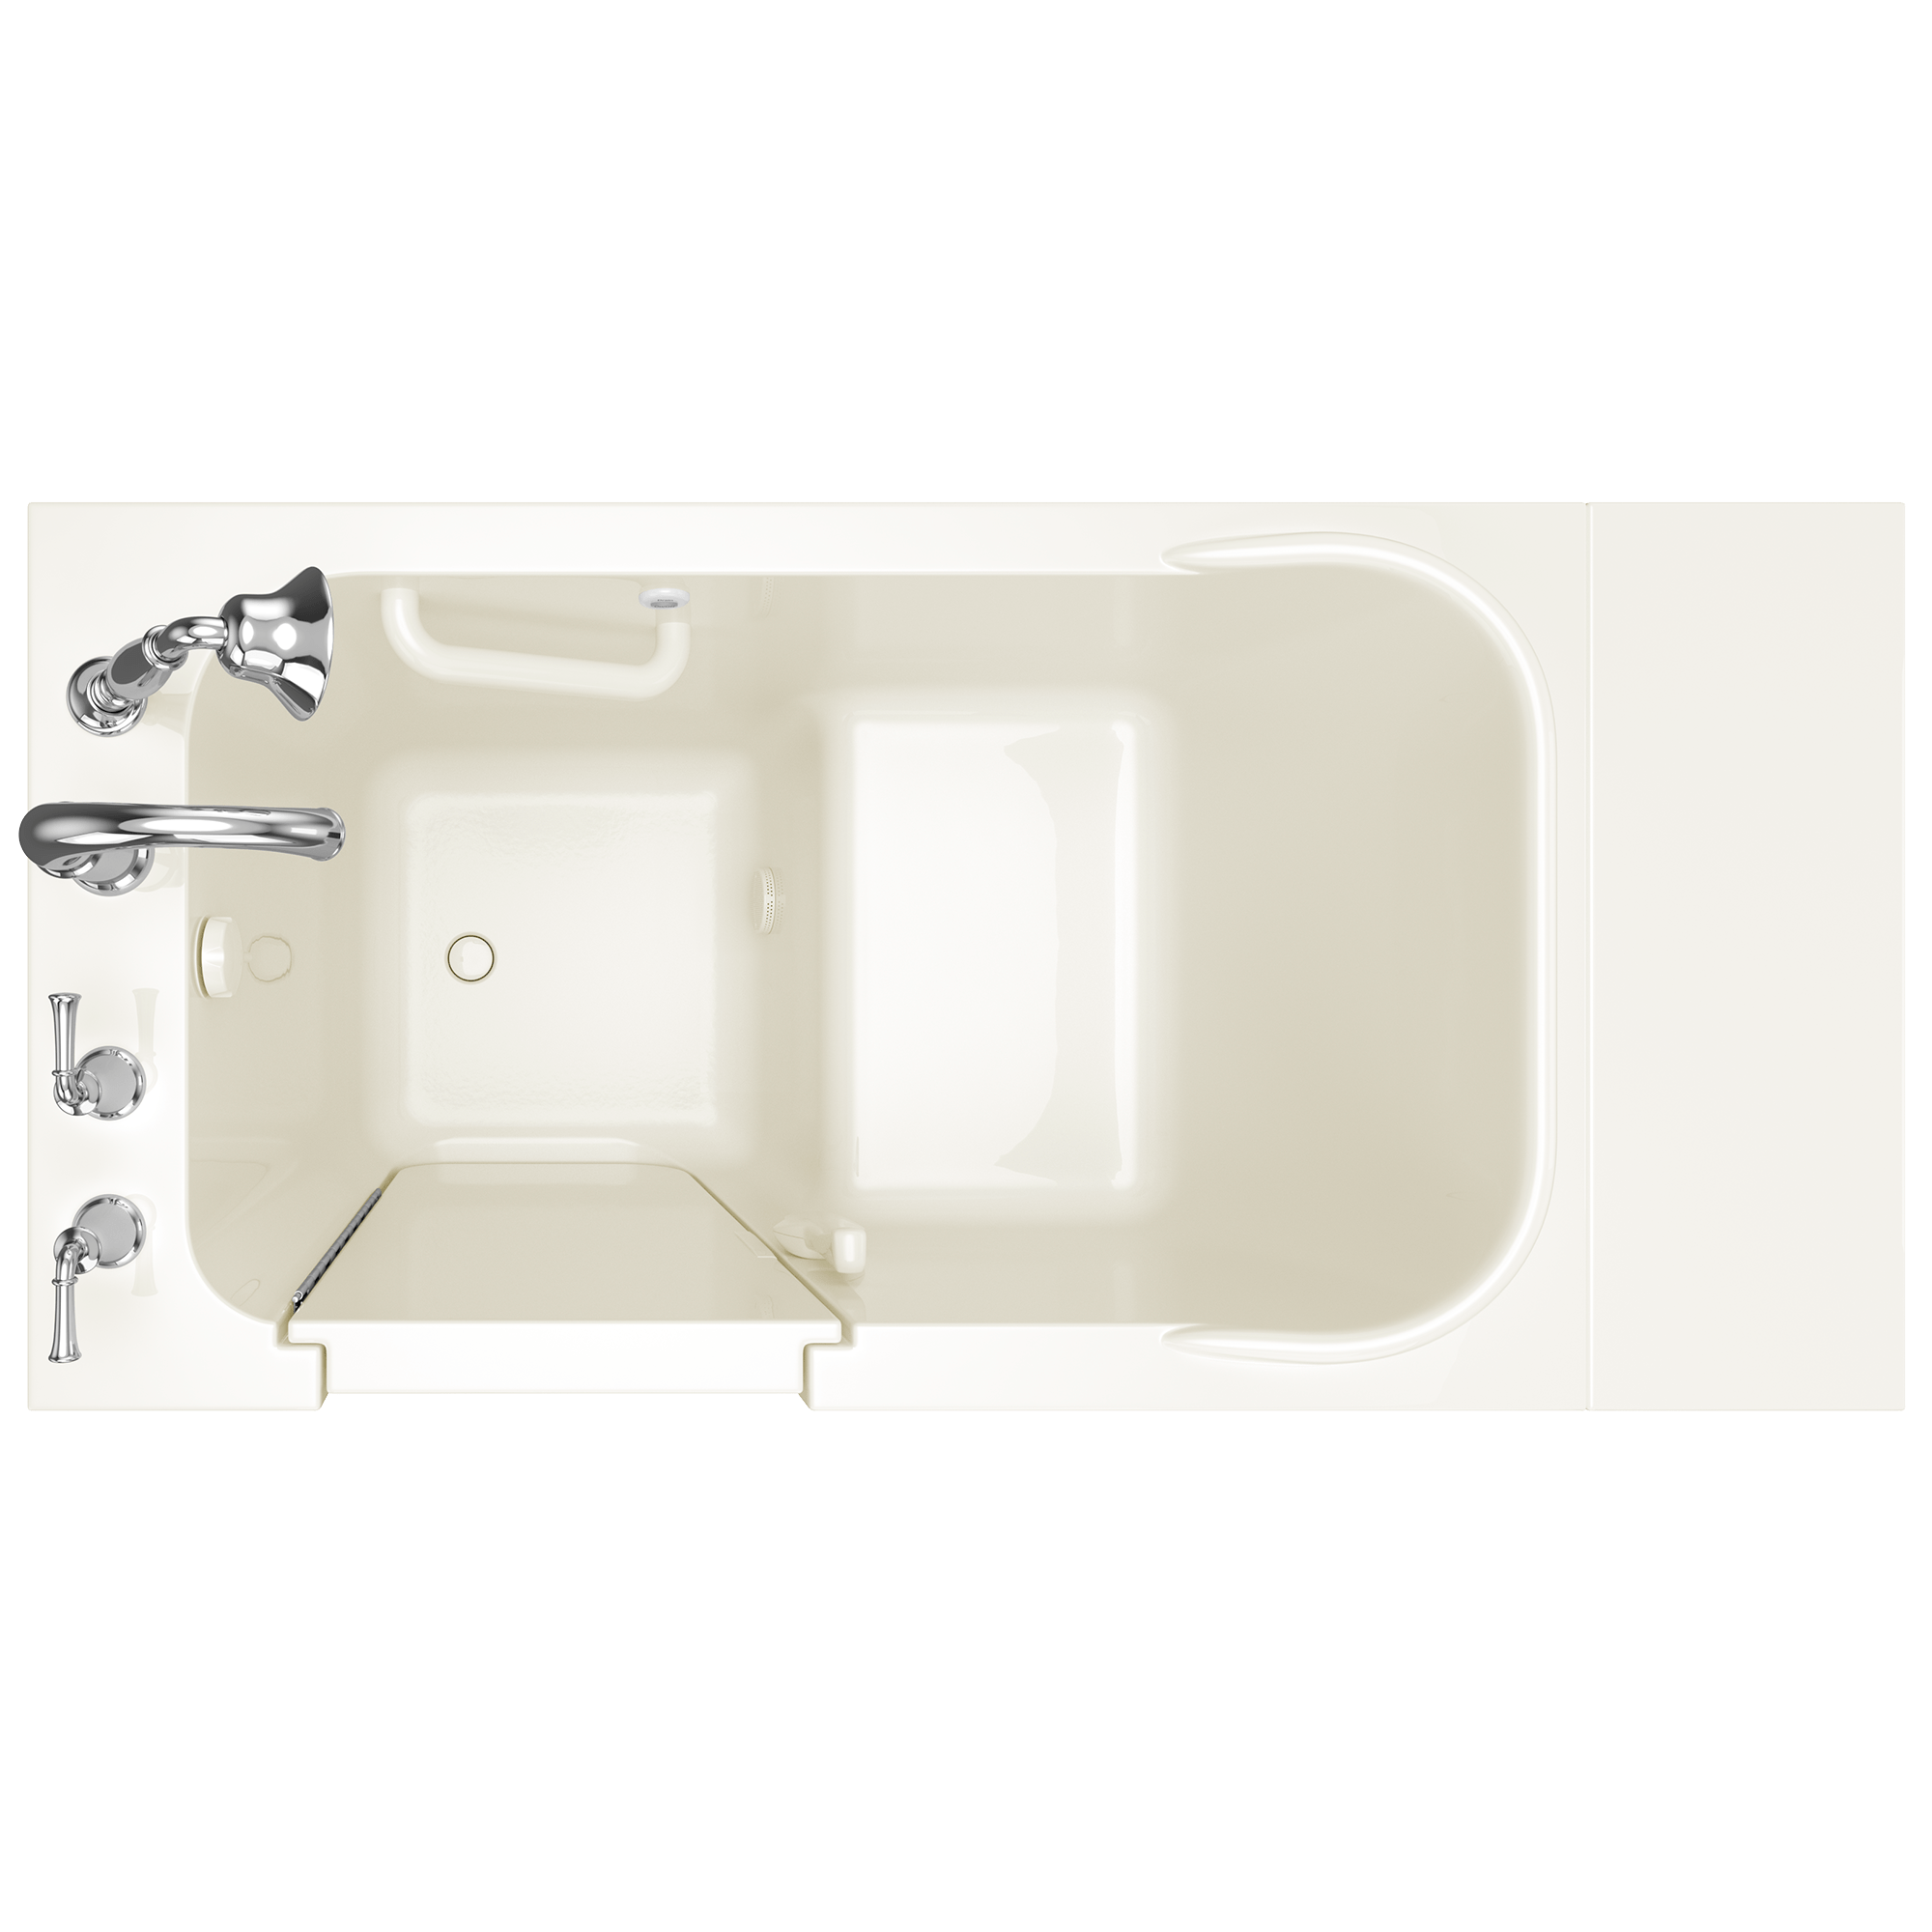 Gelcoat Value Series 28 x 48 Inch Walk in Tub With Soaker System   Left Hand Drain With Faucet WIB LINEN